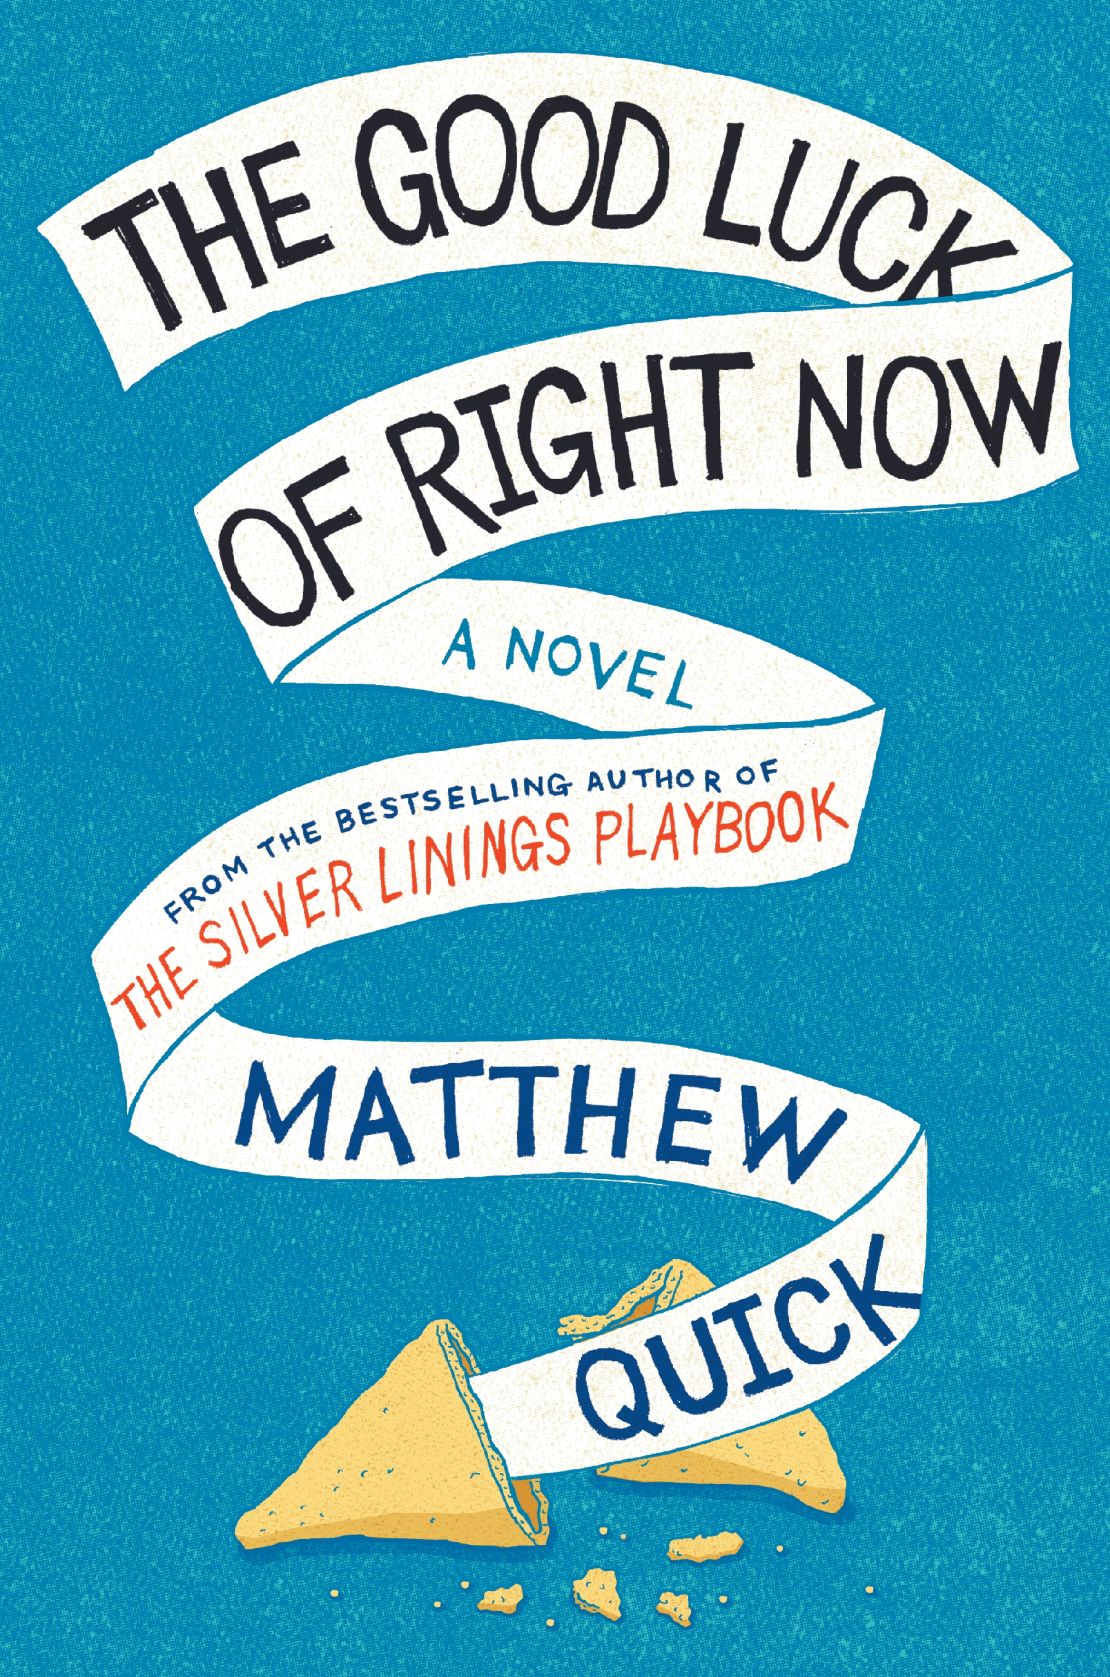 "The Good Luck of Right Now" is Matthew Quick's latest novel.